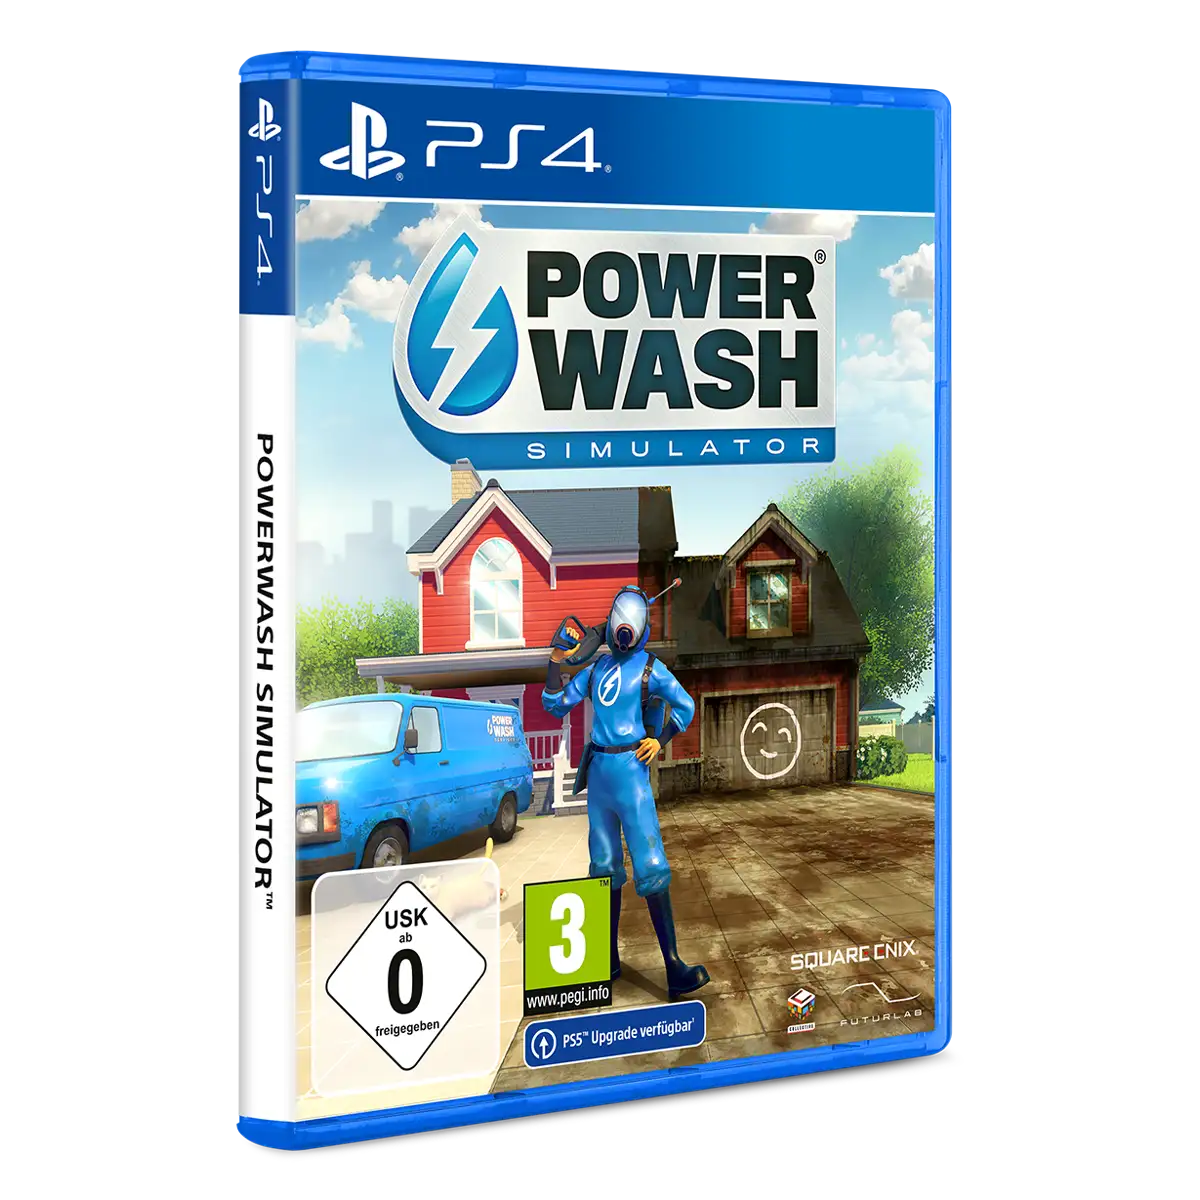 PowerWash Simulator is Coming Soon to PS4, PS5 & Nintendo Switch